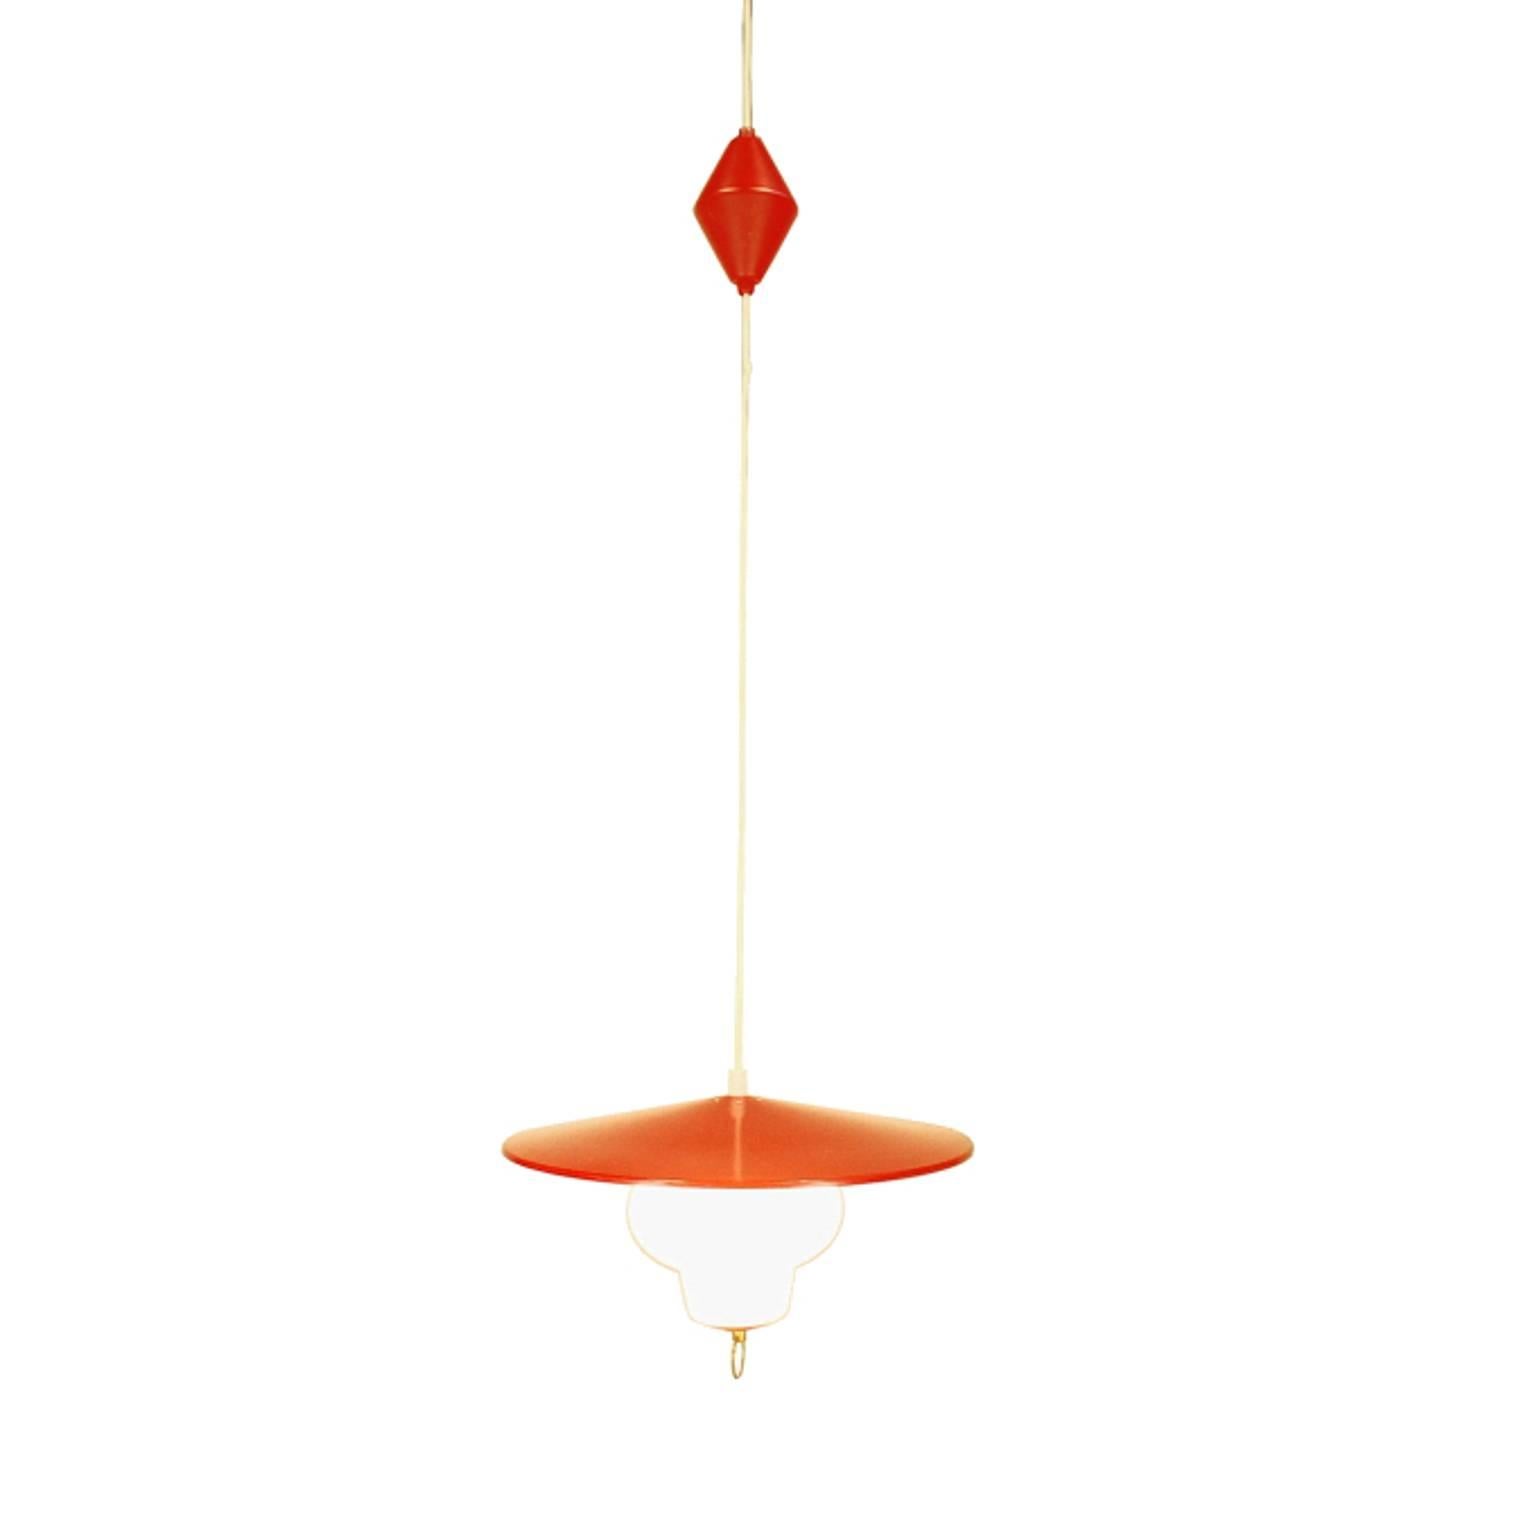 Nice pendant lamp with red lacquered metal and opal glass. The diameter is about 42 cm, the height is 26 cm. Made by the Danish company Voss who stopped producing lamps in 1968. Seeing it's age this lamp is in a very good condition. The cord is